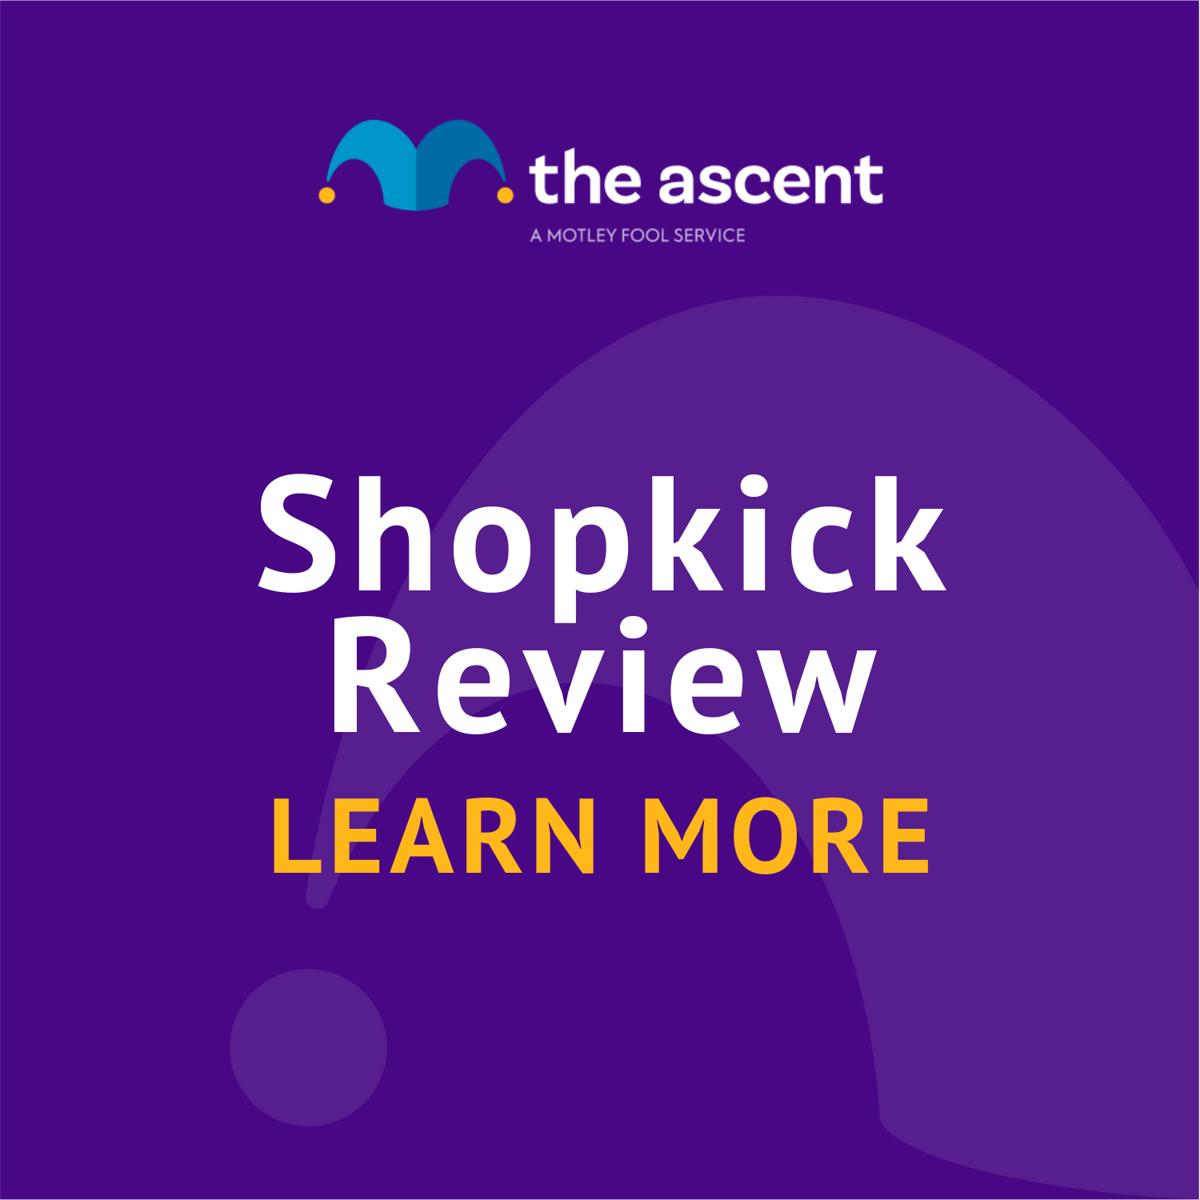 Shopkick Review: Maximizing Your Shopkick Experience: Tips and Tricks